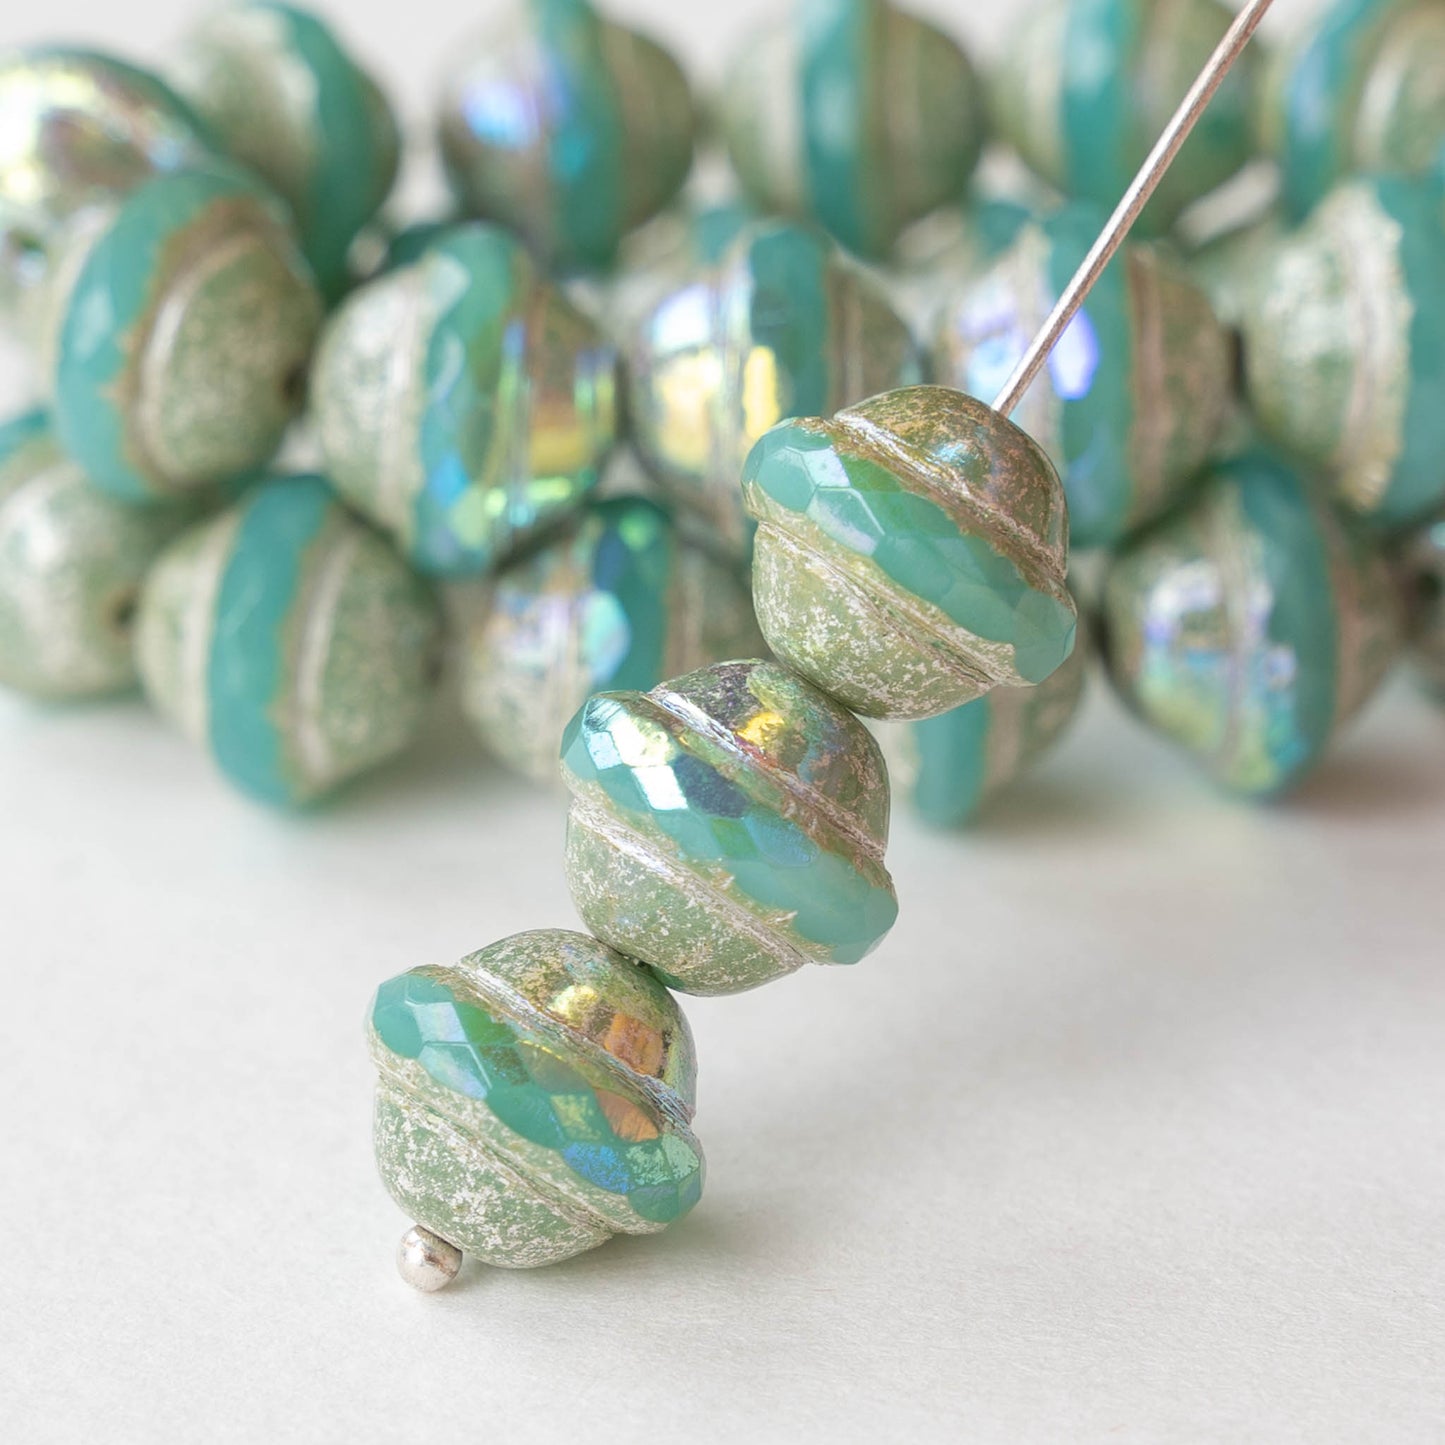 10x12mm Saturn Beads - Saturn Tea Green with Antique Silver and AB - 4 Beads